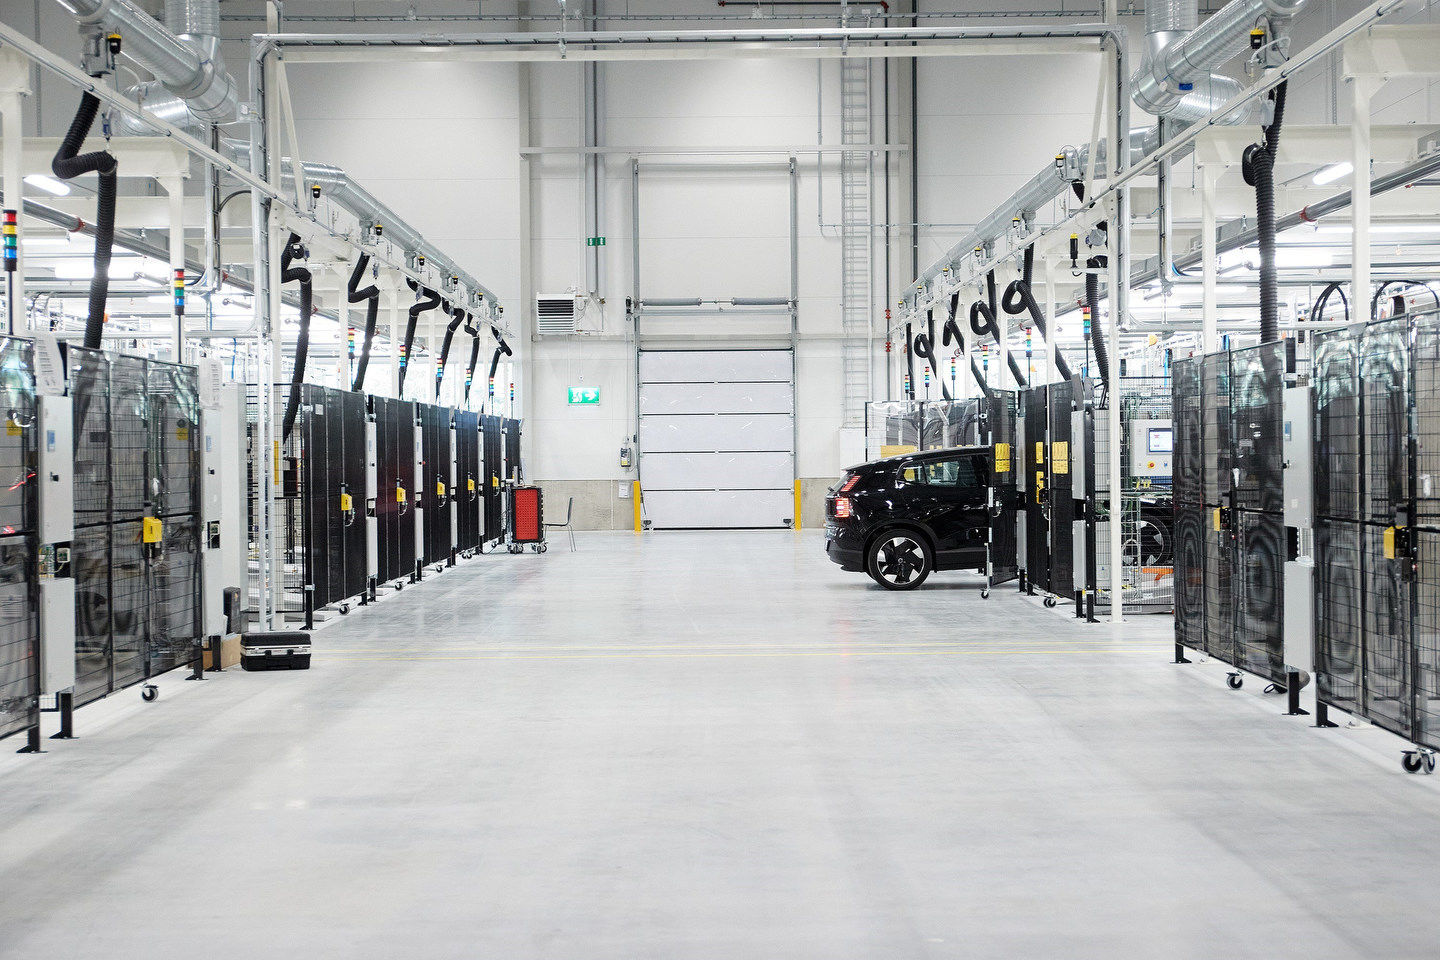 Software Takes the Wheel: Volvo Cars' New Gothenburg Facility